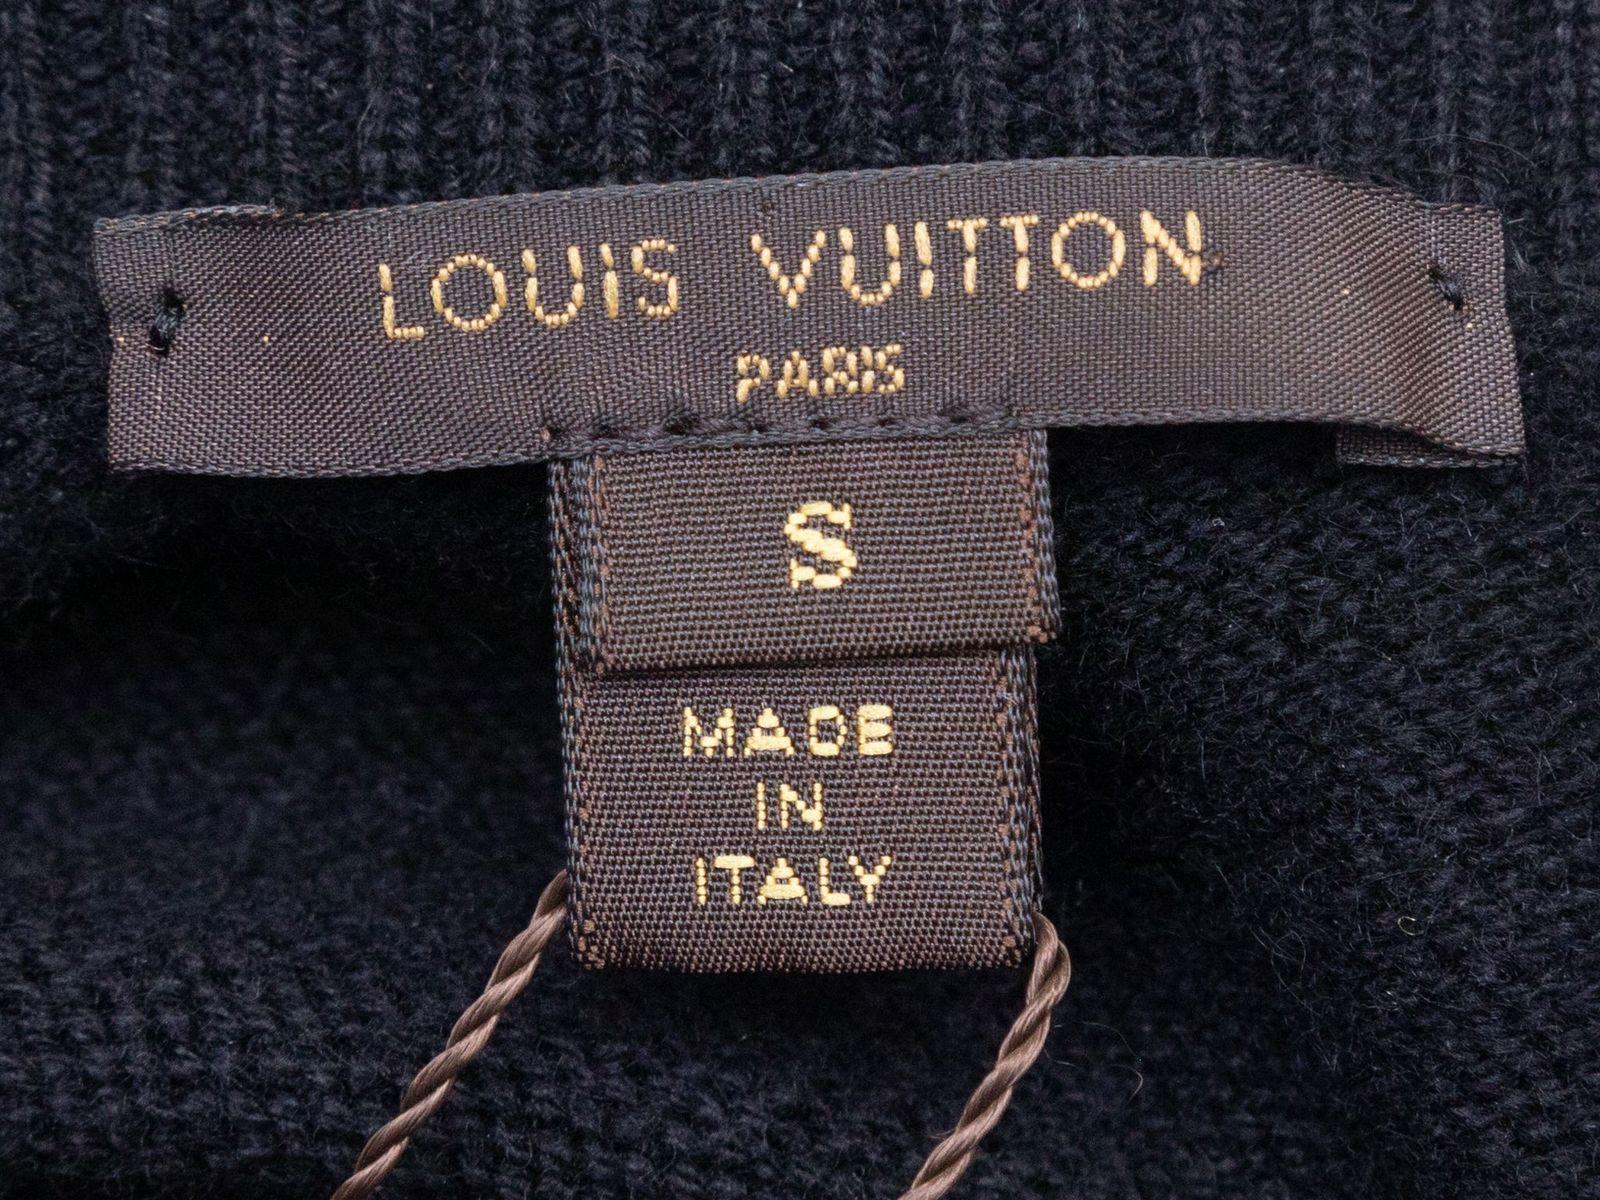 Product Details: Black cashmere sweater dress by Louis Vuitton. Crew neck. Short sleeves. Silver-tone bead detailing at front bodice. 34